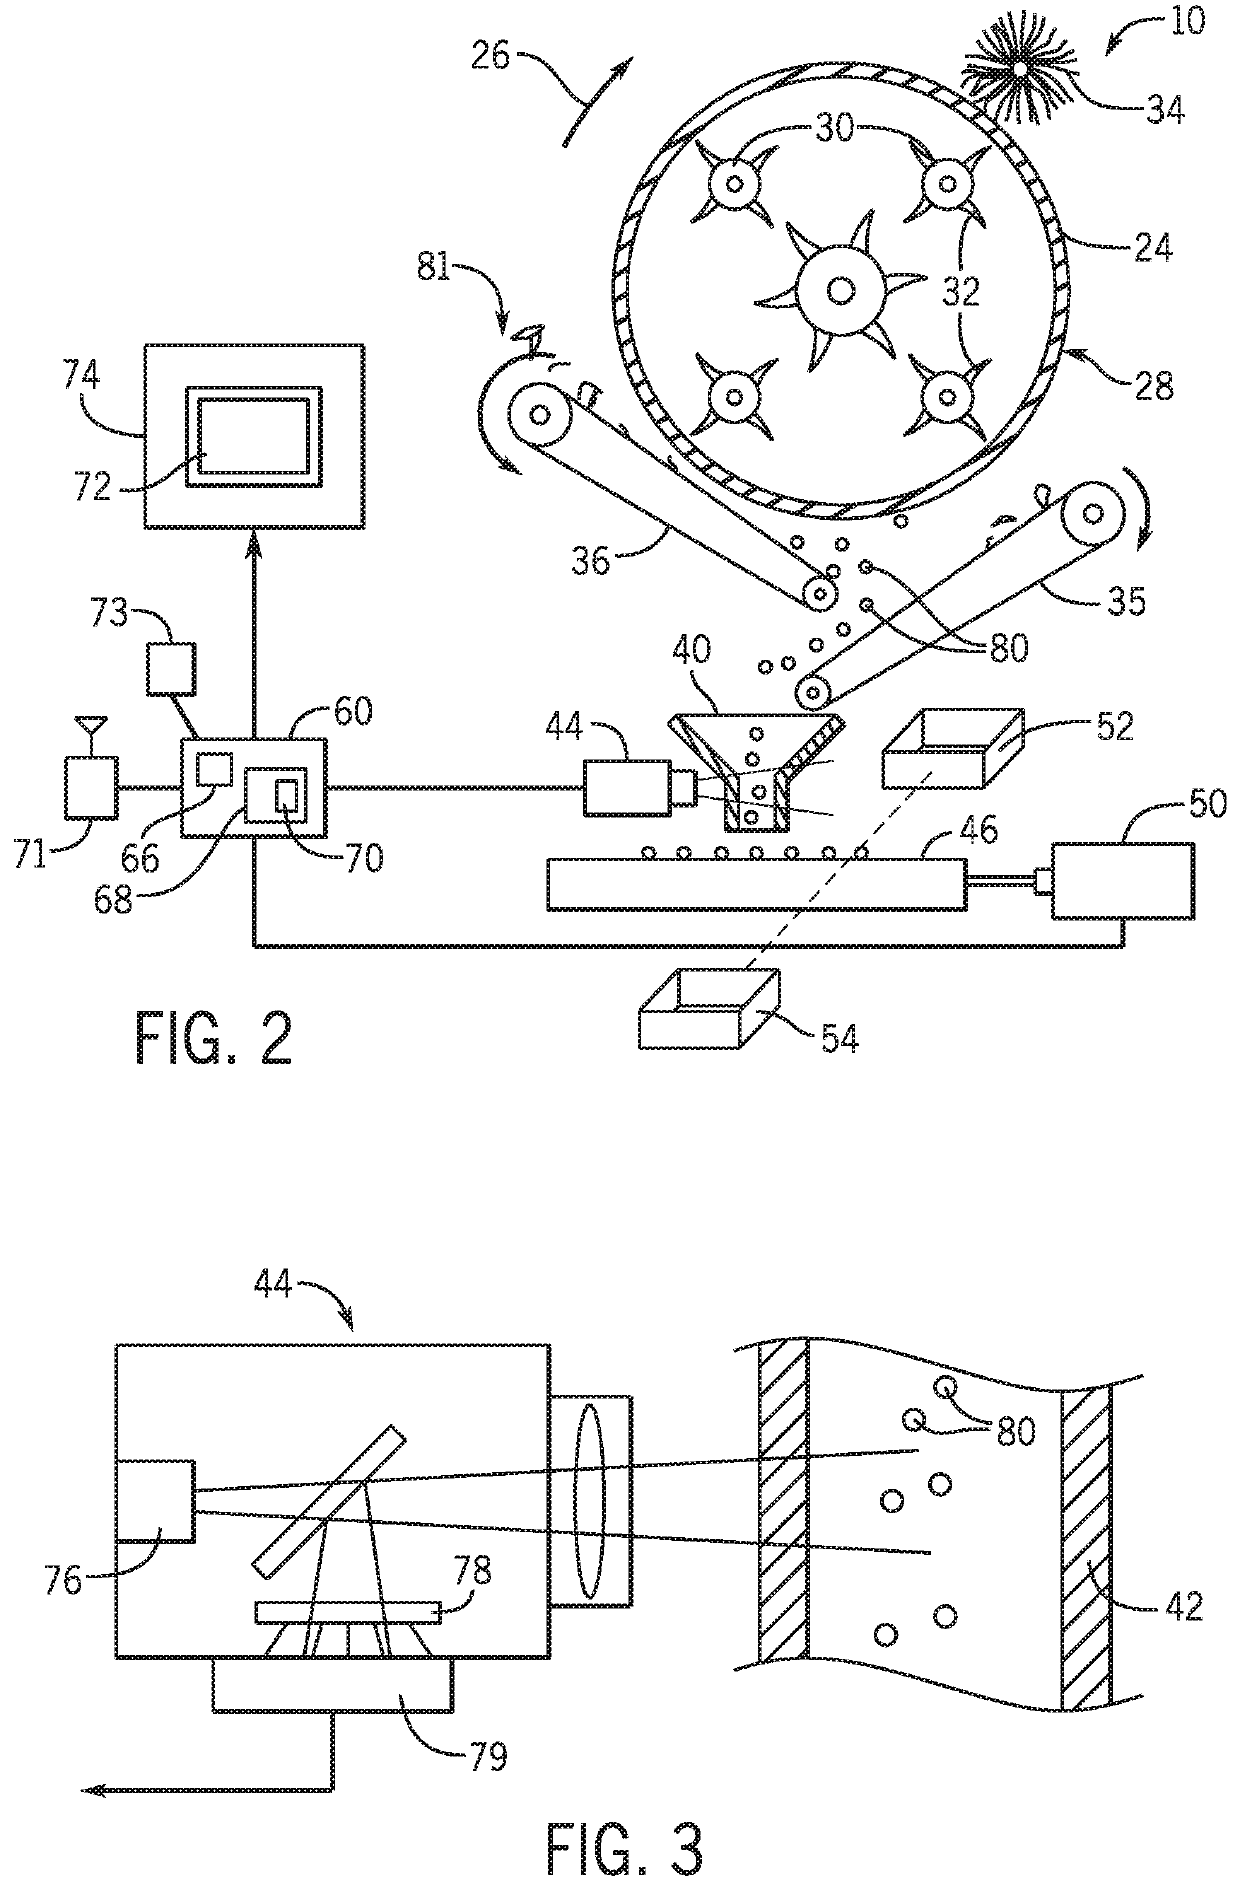 Apparatus for assessing and harvesting peas